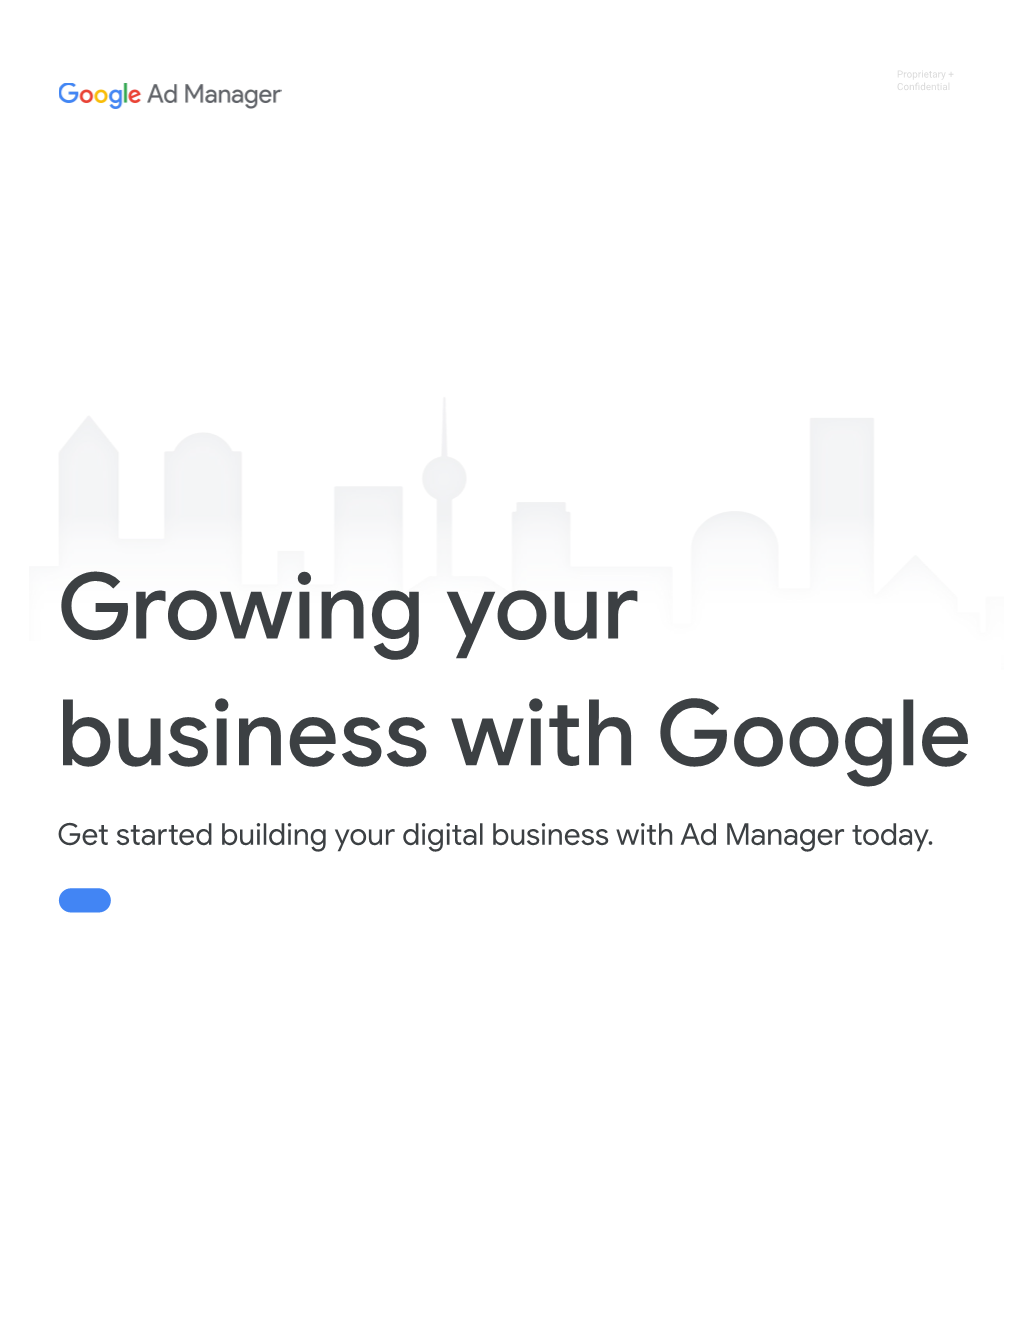 Growing Your Business with Google